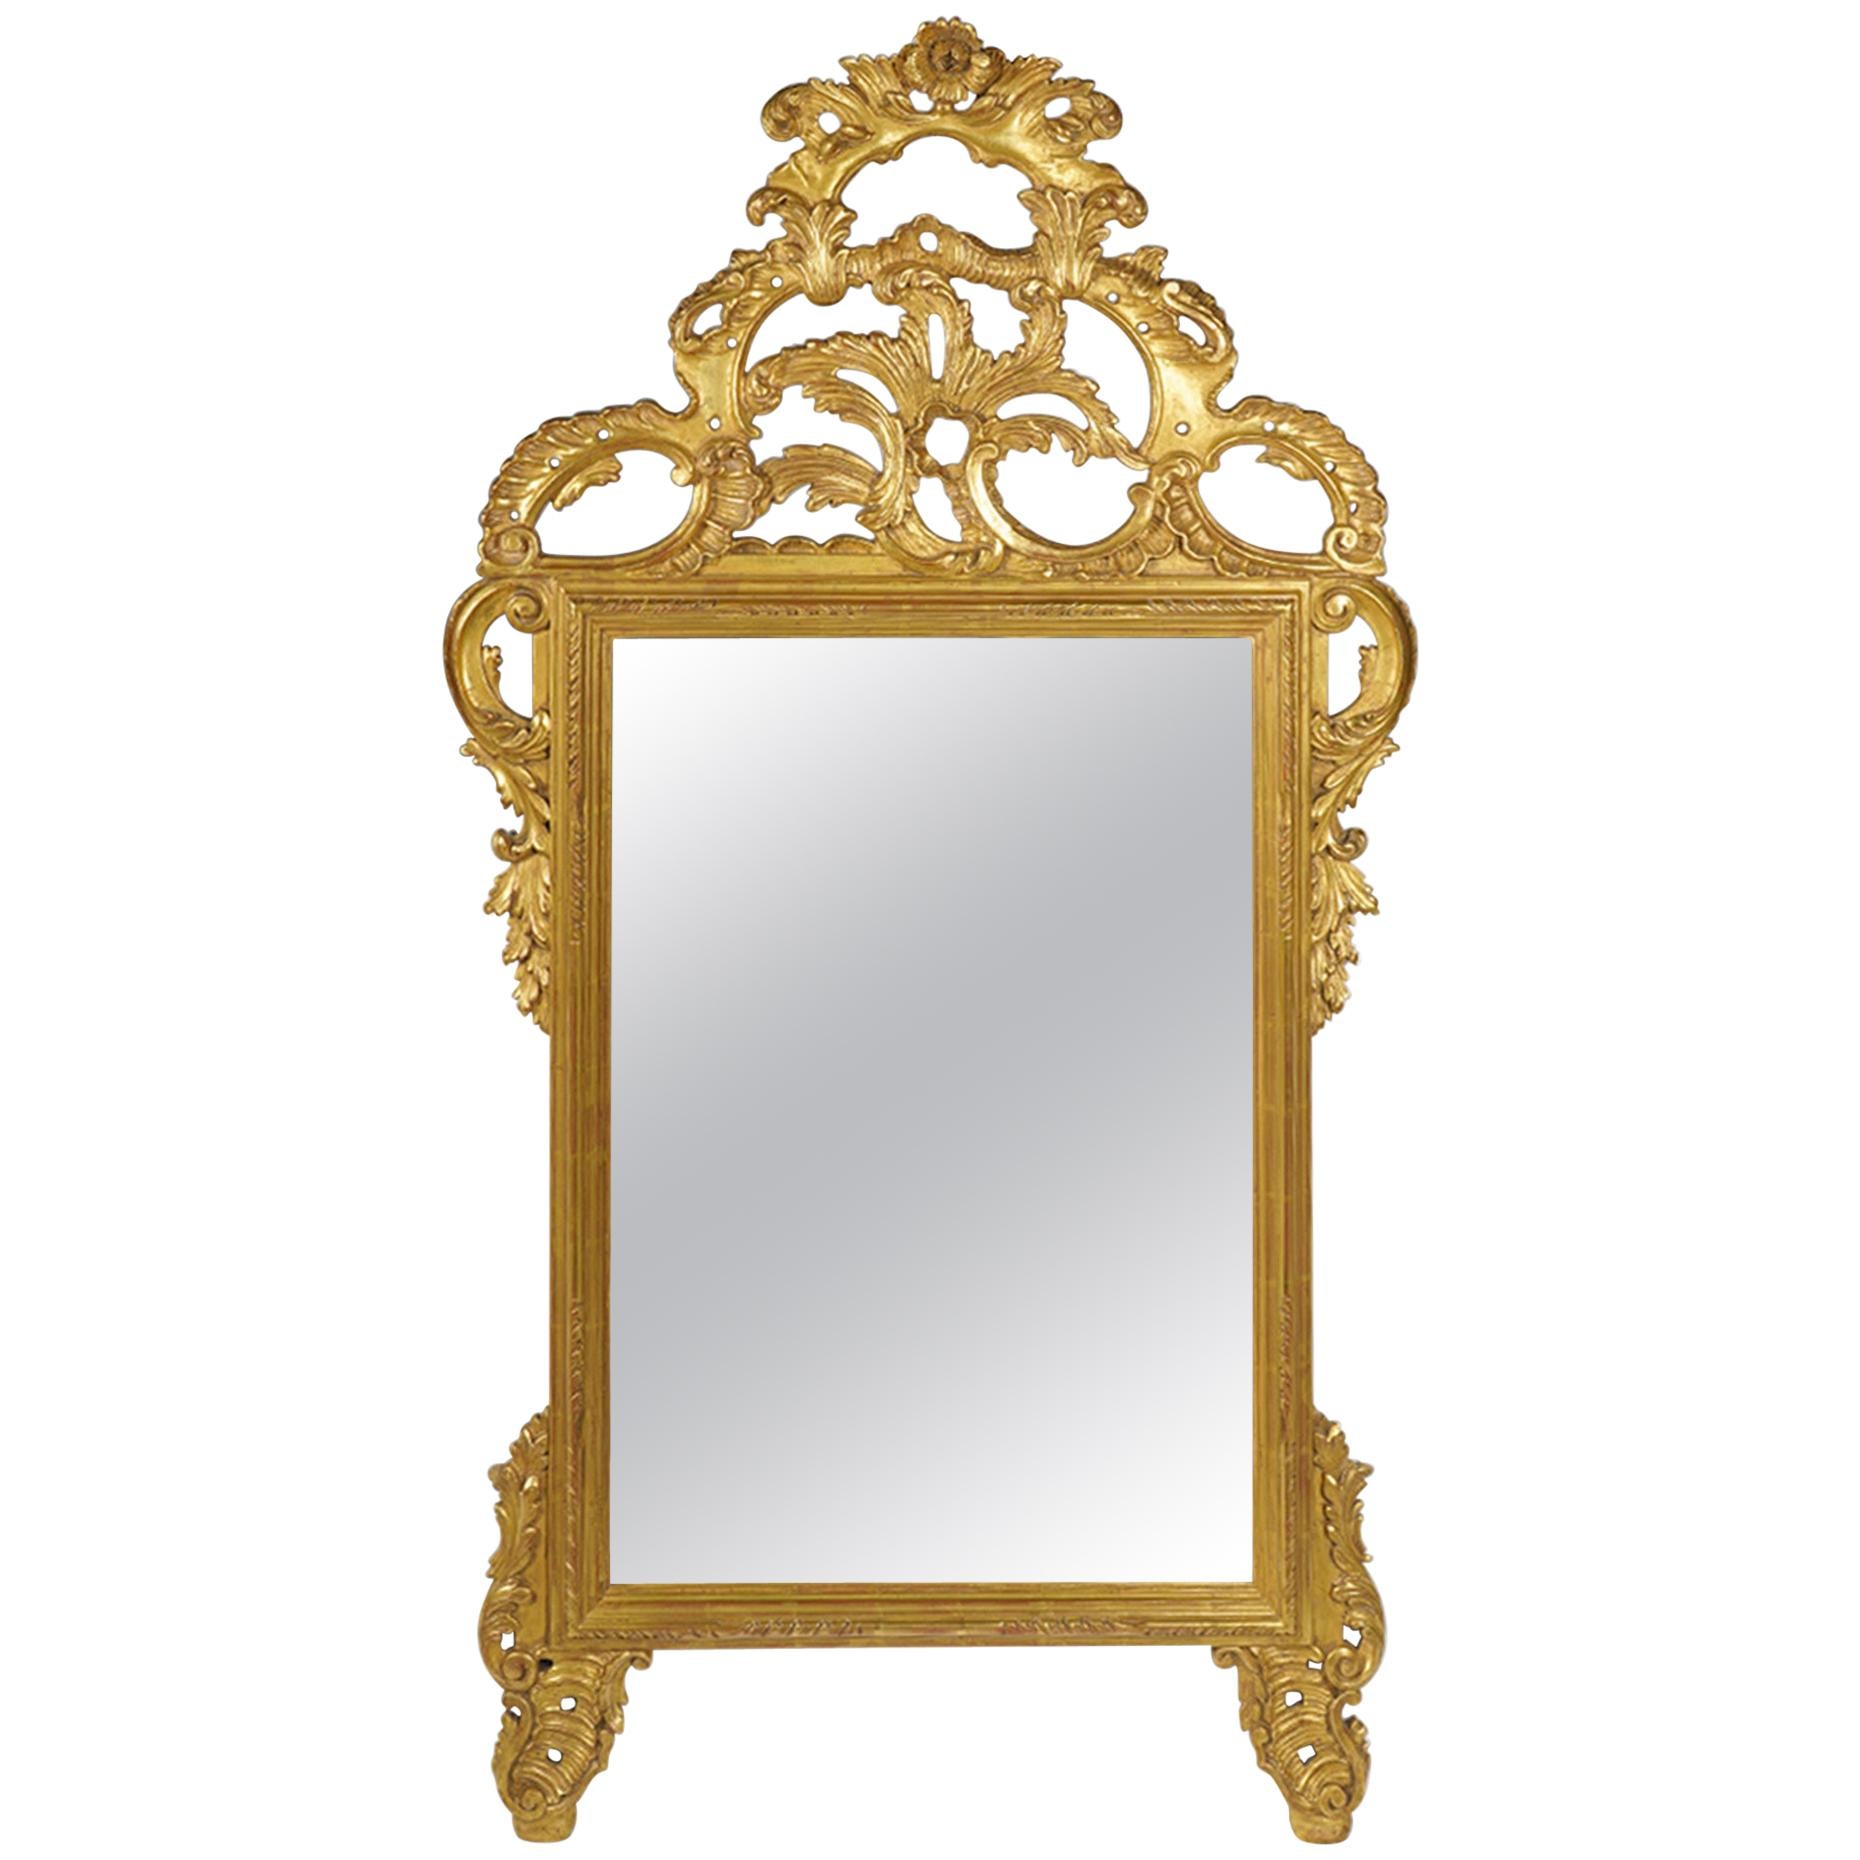 Magnificent Italian Rococo Style Carved Giltwood Wall Mirror by Palladio, Italy